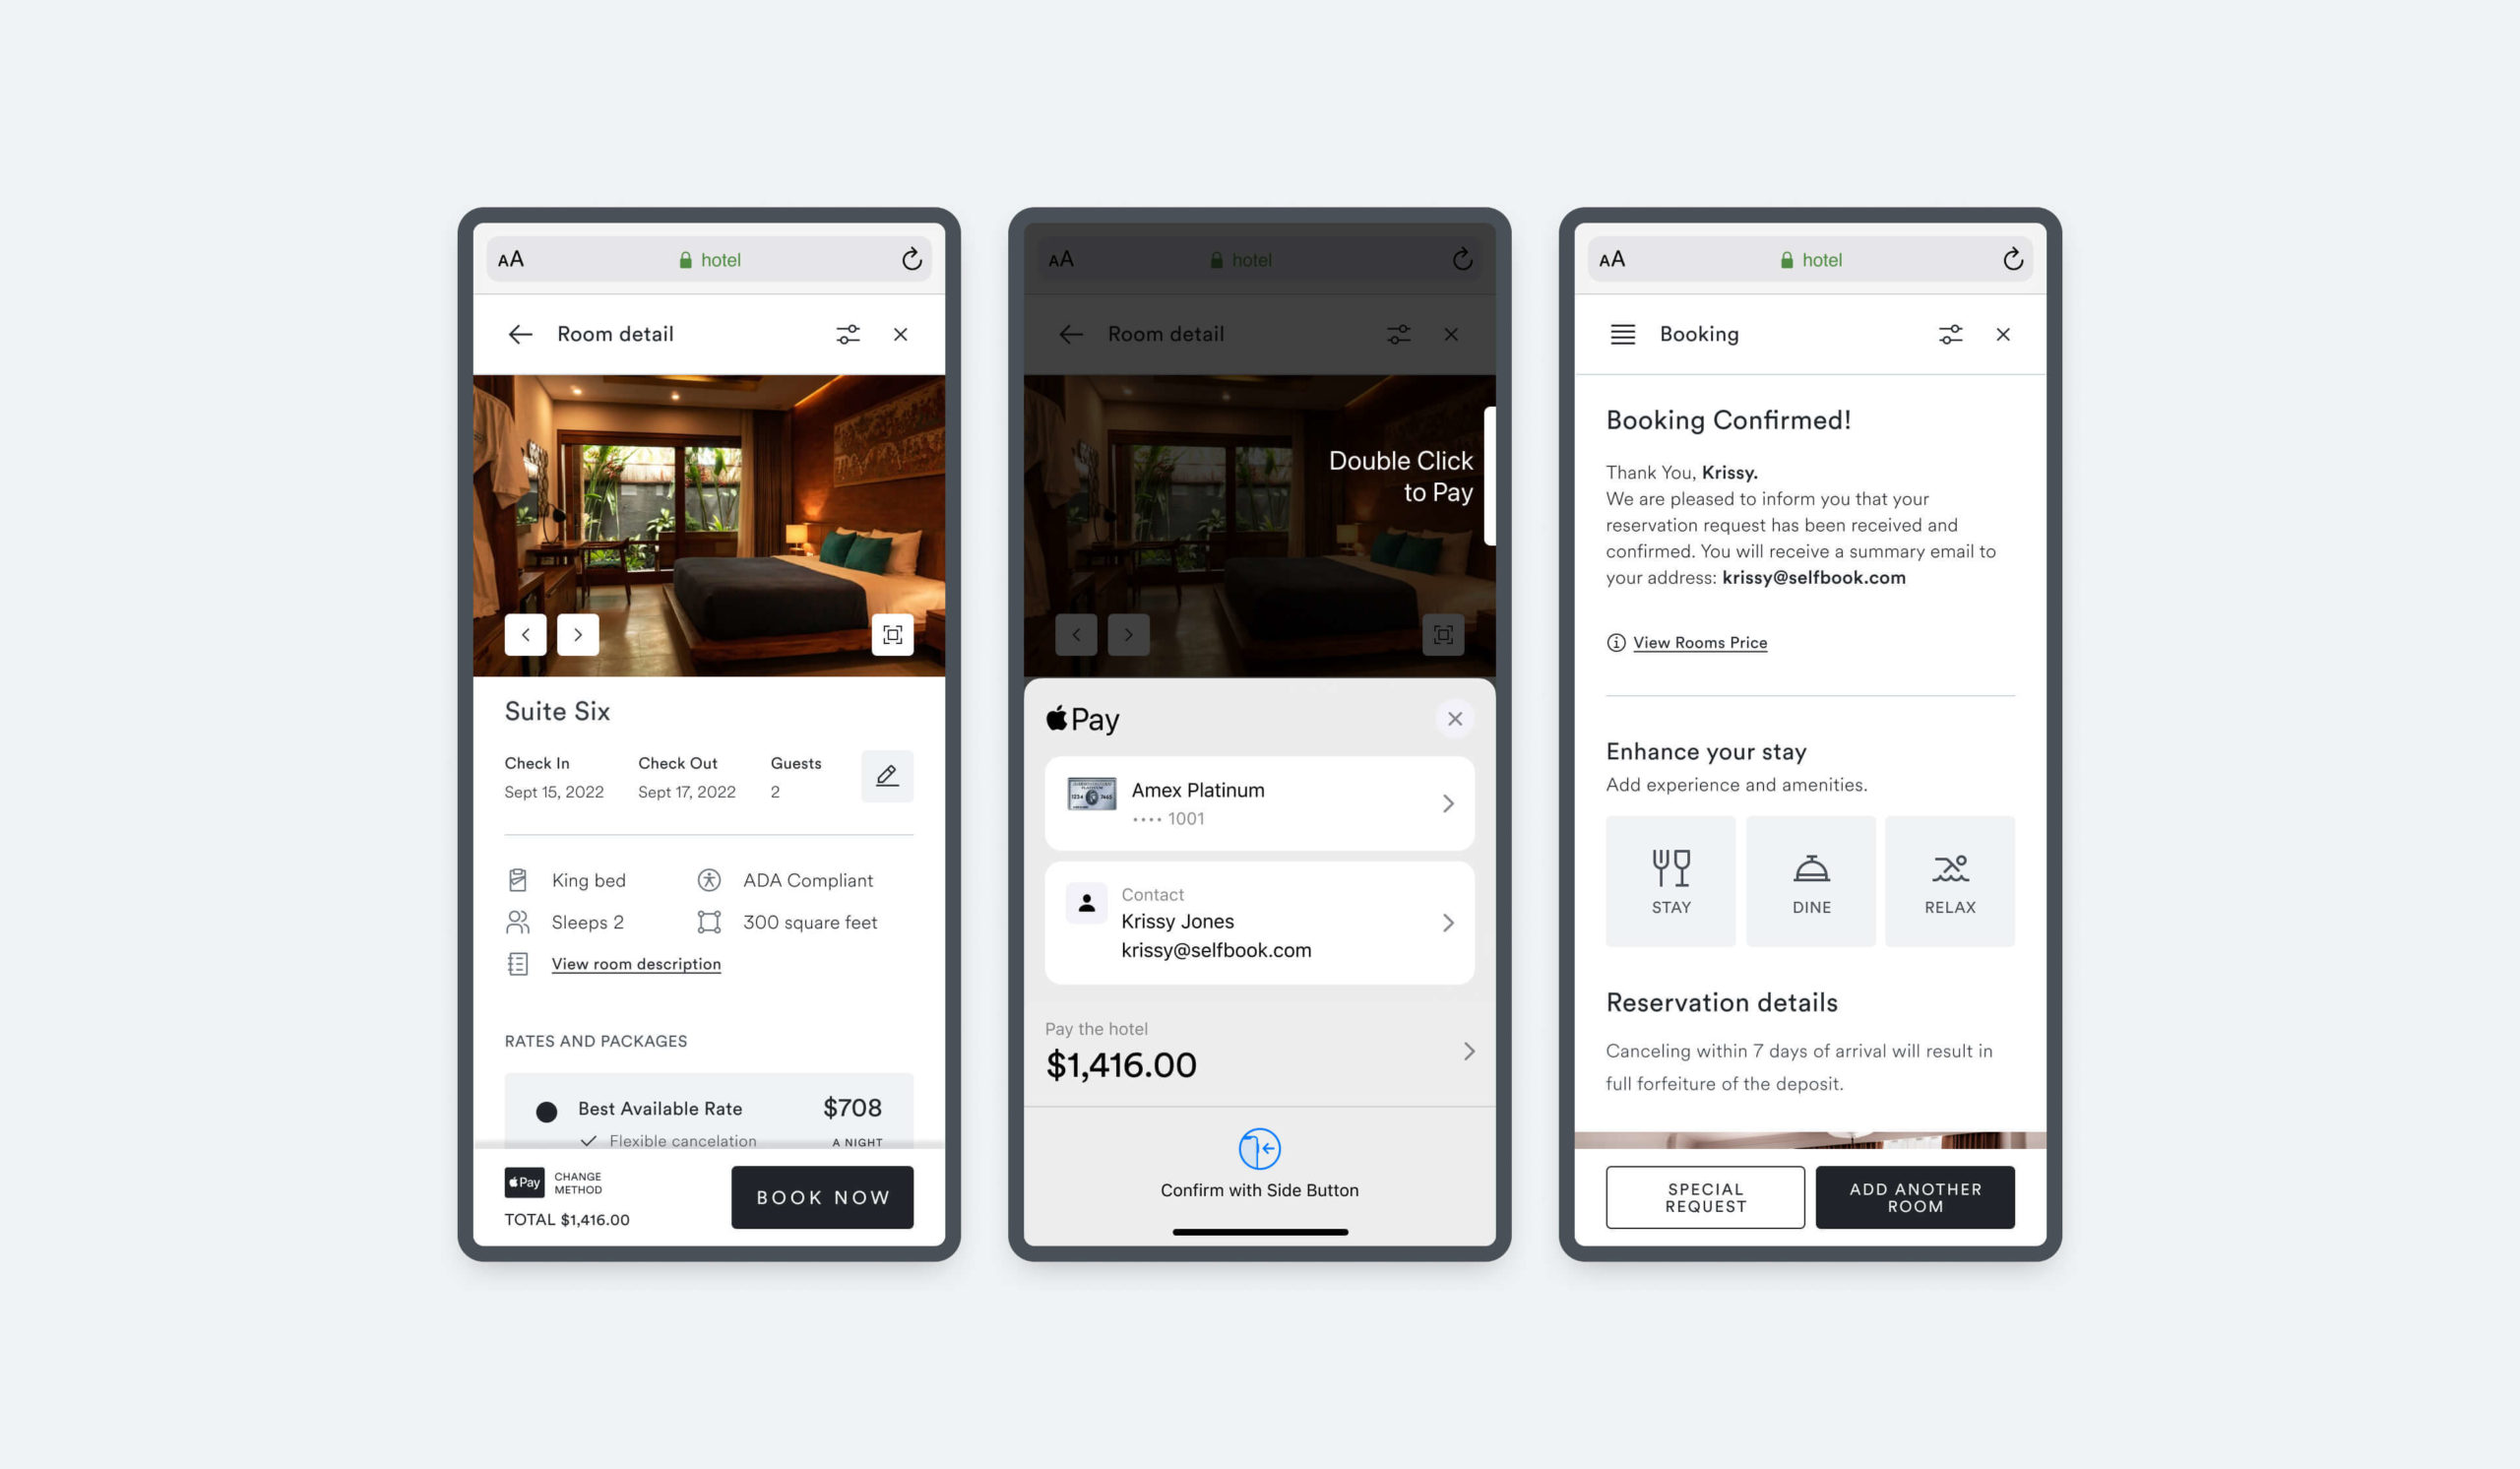 Selfbook's smooth check out flow allows users to easily and safely book and customize reservations while helping hotels increase direct bookings and revenue 